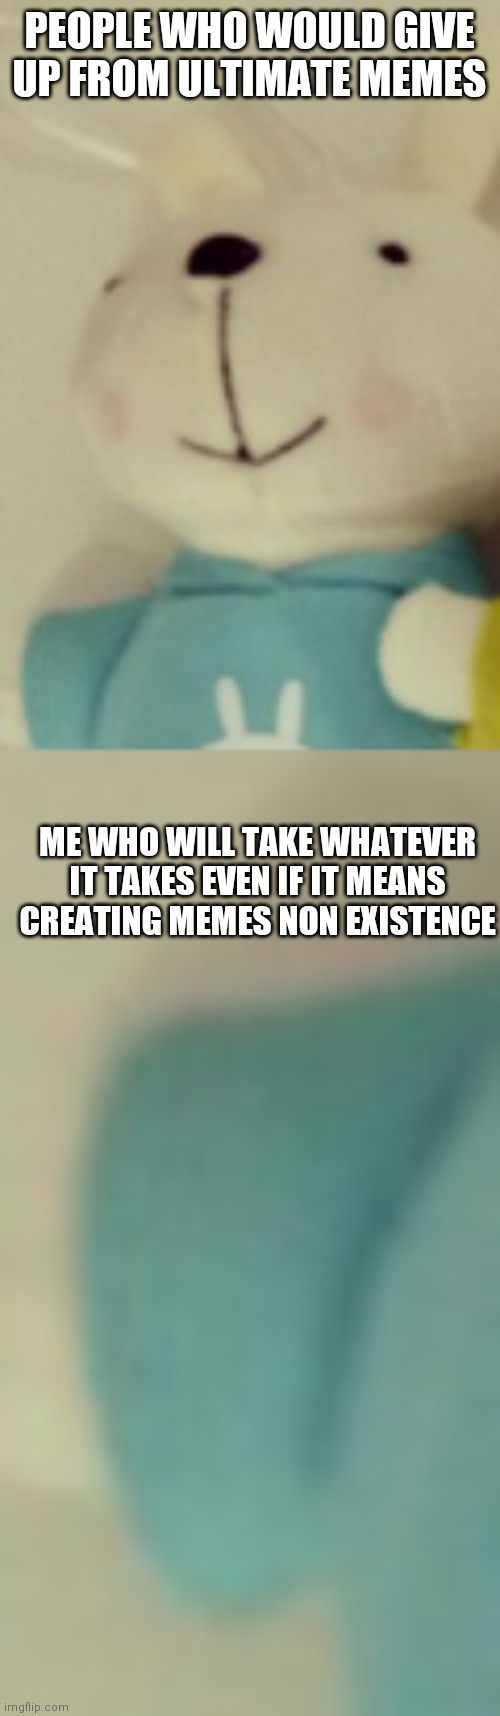 Those people would but not me | PEOPLE WHO WOULD GIVE UP FROM ULTIMATE MEMES; ME WHO WILL TAKE WHATEVER IT TAKES EVEN IF IT MEANS CREATING MEMES NON EXISTENCE | image tagged in memes | made w/ Imgflip meme maker